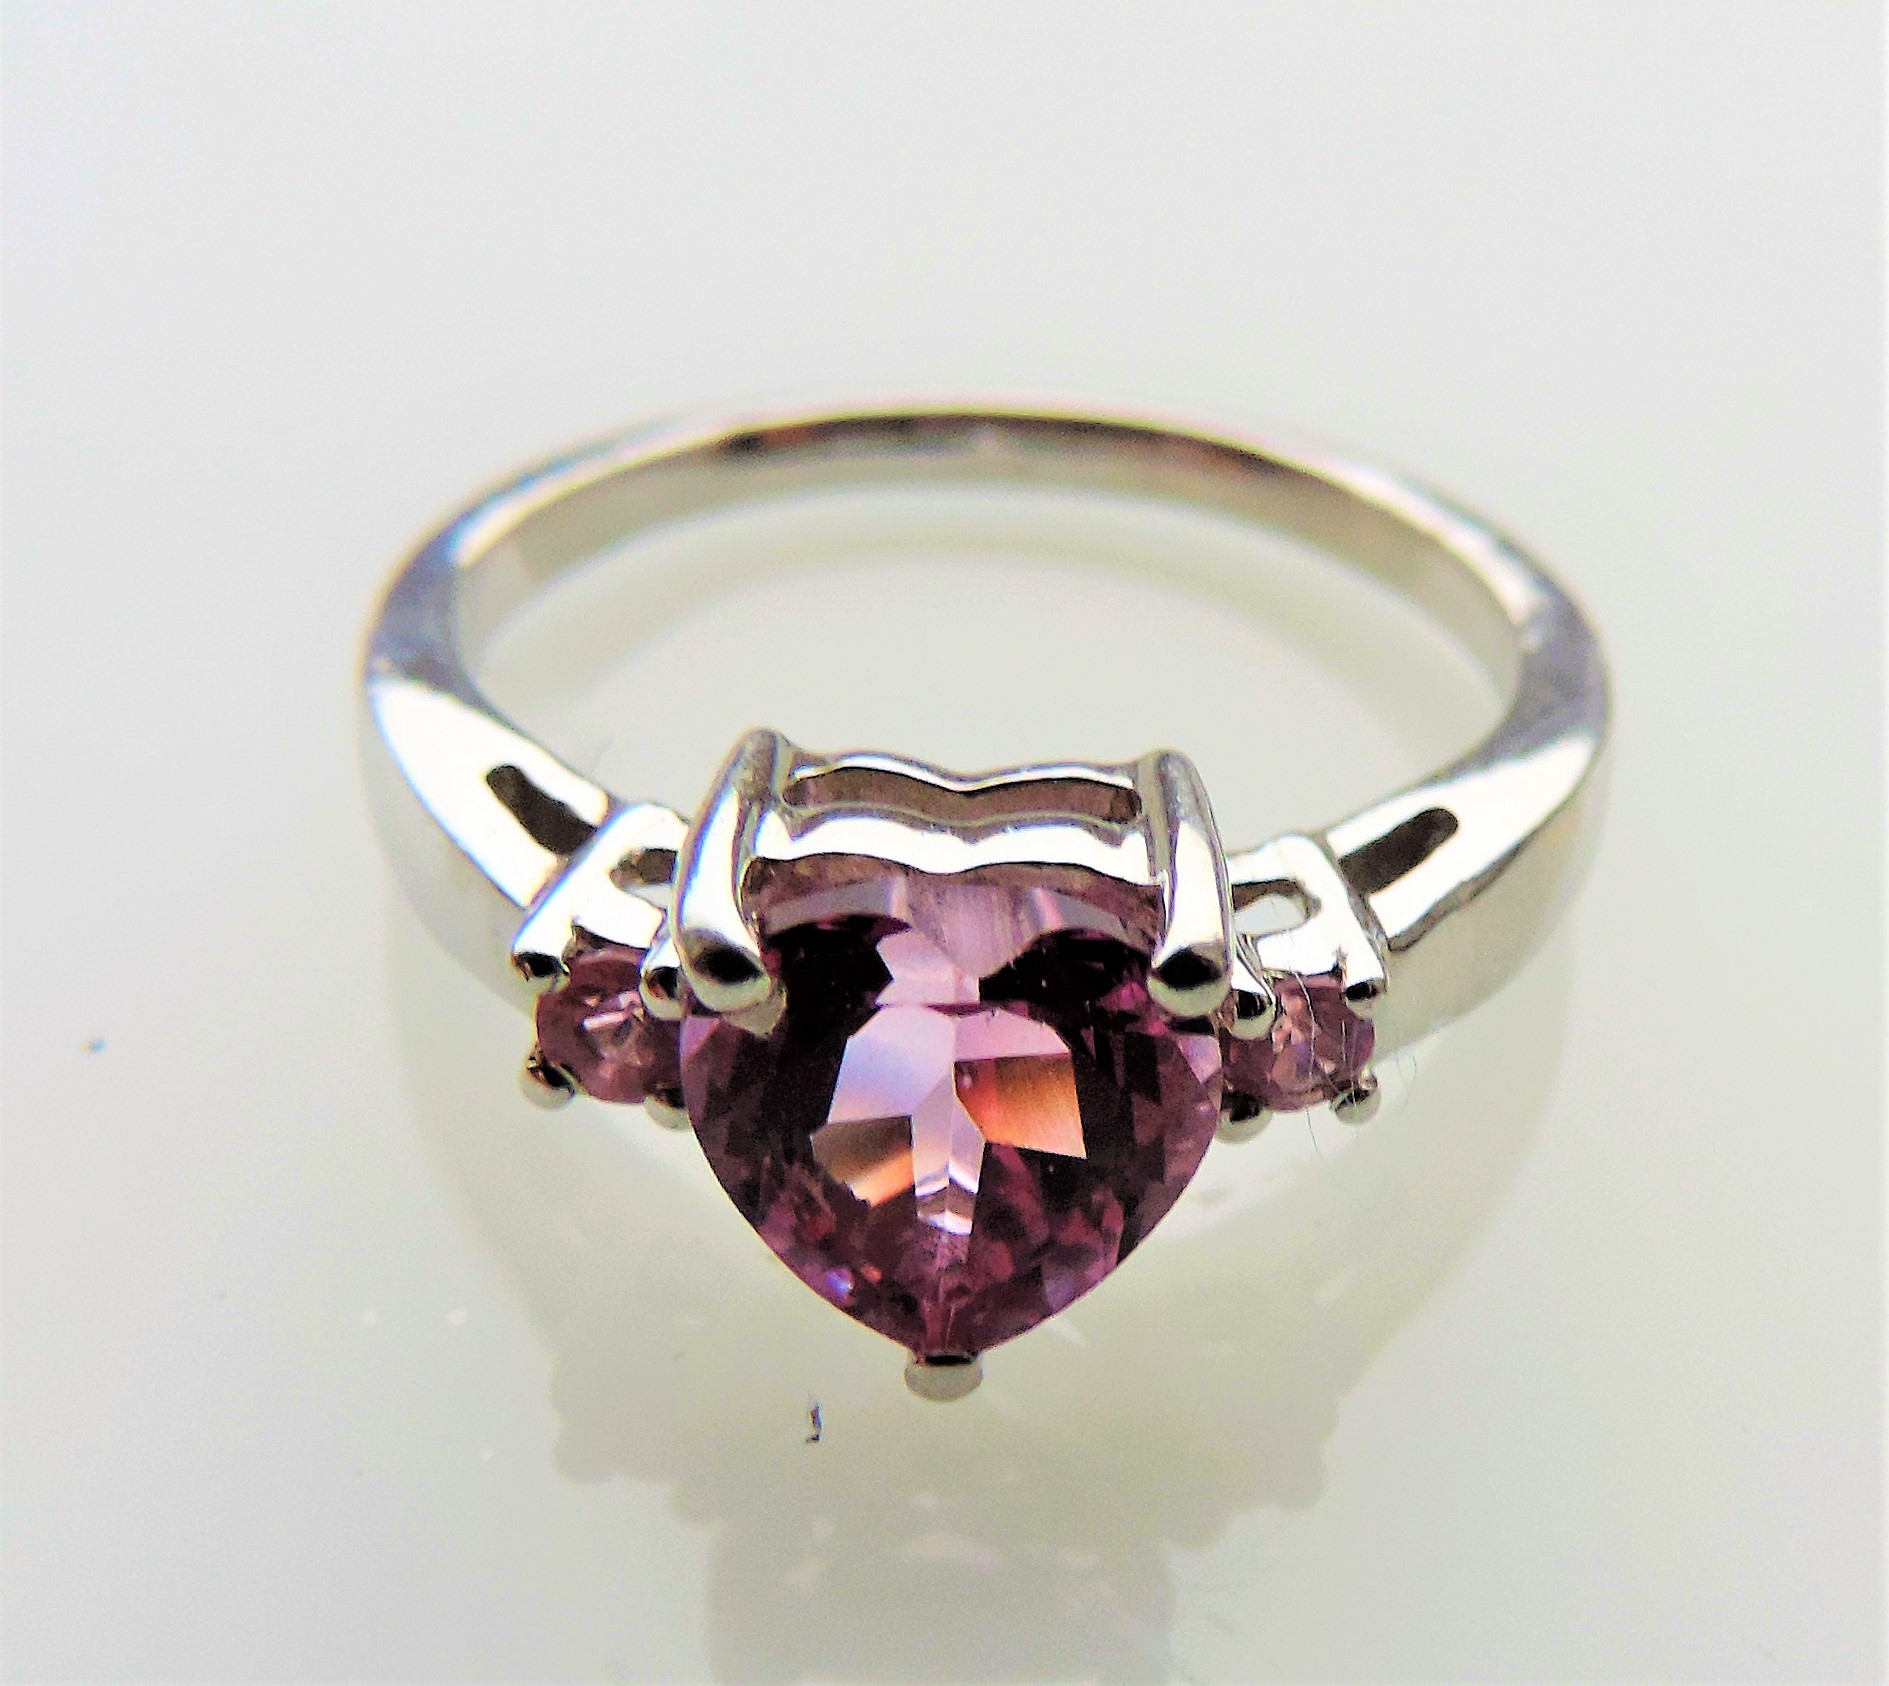 1 carat Solitaire Heart Pink Sapphire Ring - Image 2 of 5